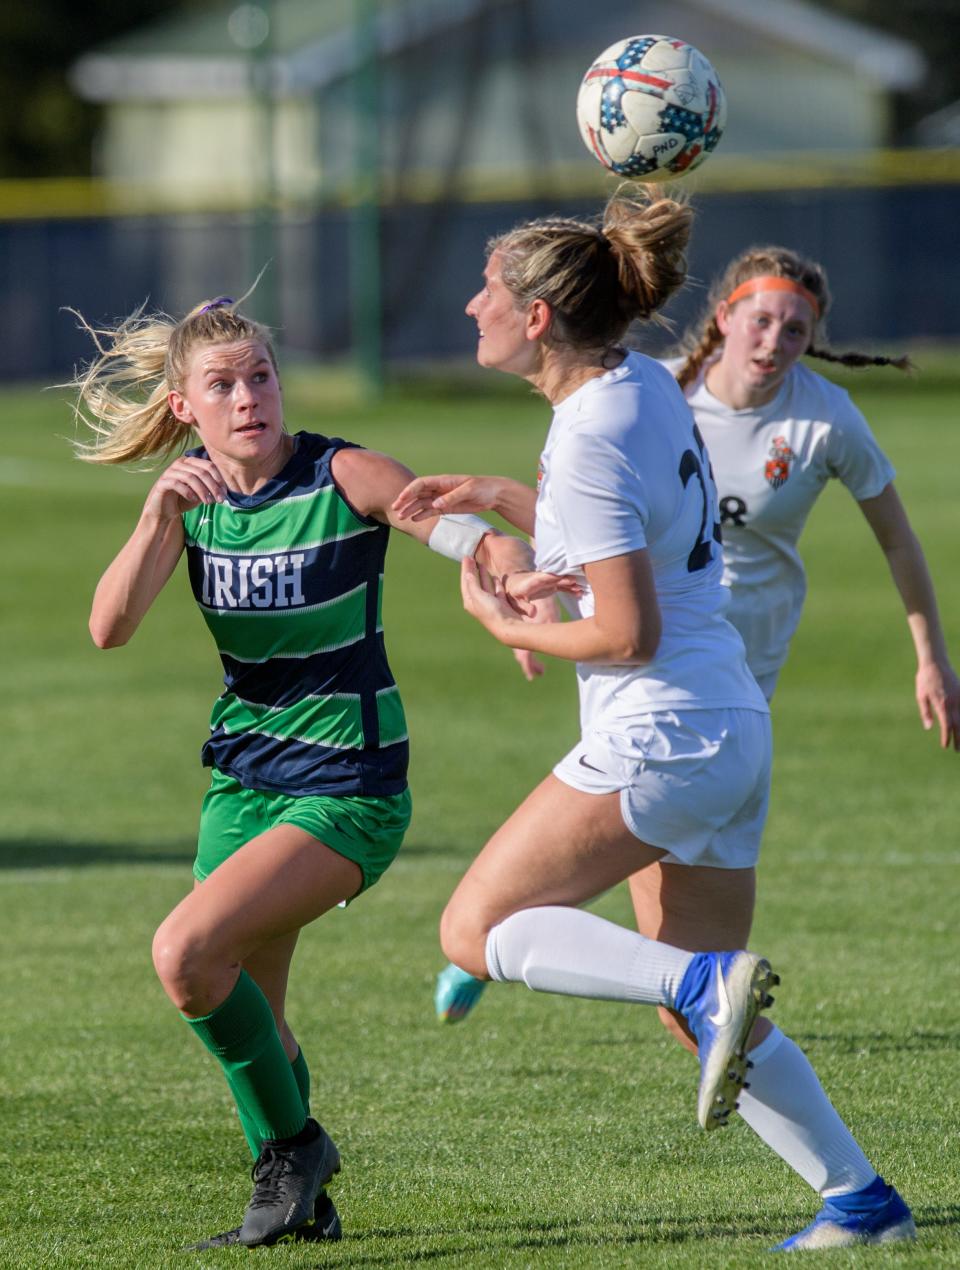 Peoria Notre Dame's Mya Wardle defends against Normal Community's Lindsey Leverton in the first period Thursday, April 13, 2023 at PND High School. The Irish blanked the Ironmen 2-0.